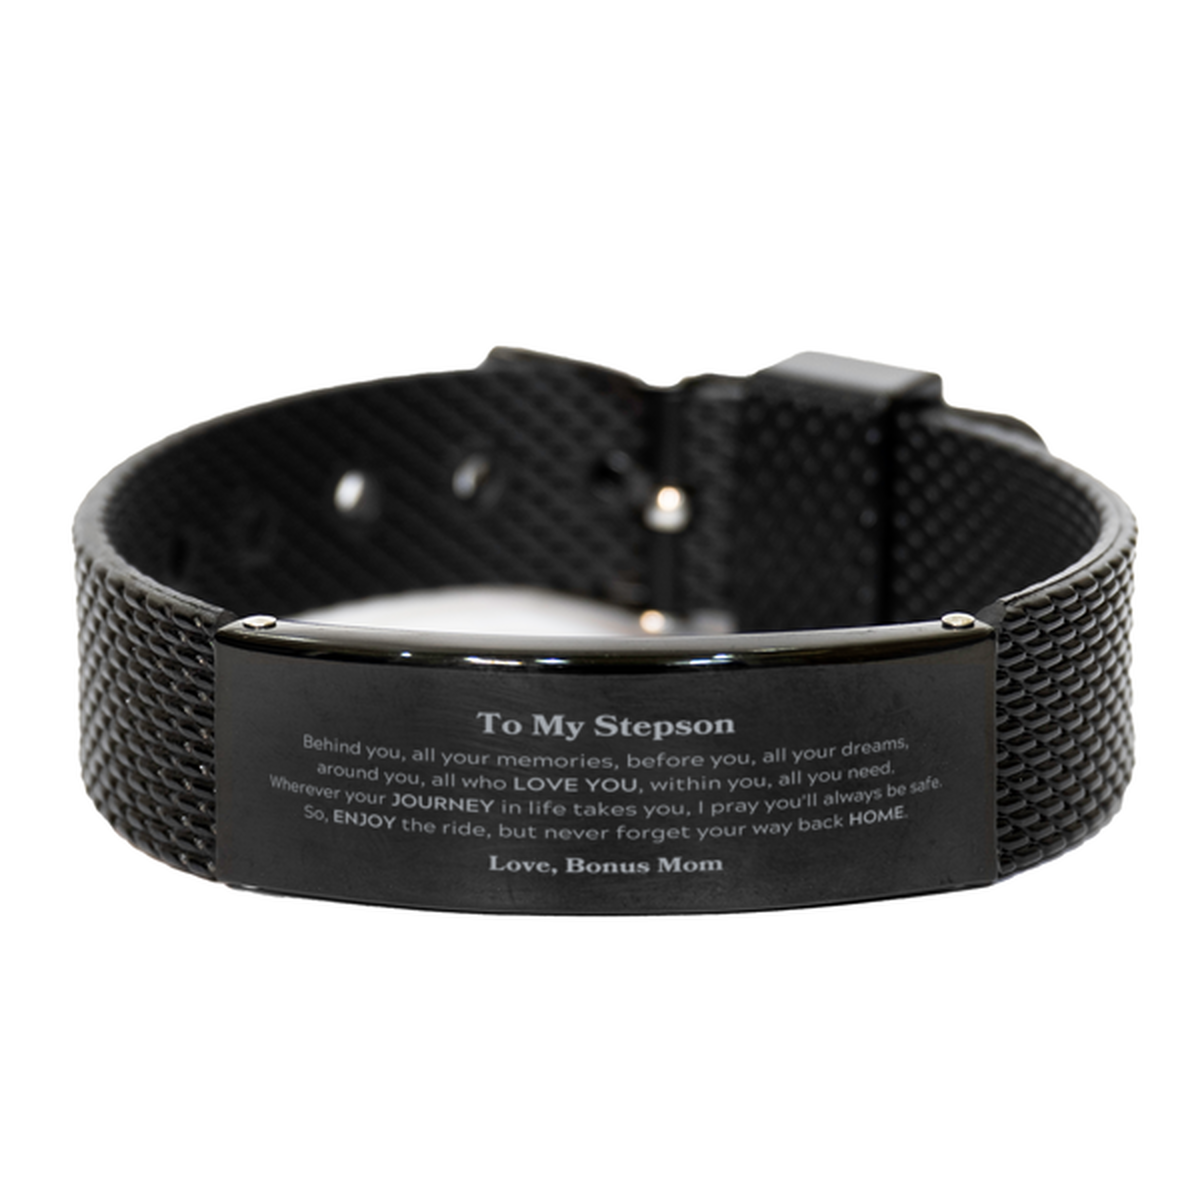 To My Stepson Graduation Gifts from Bonus Mom, Stepson Black Shark Mesh Bracelet Christmas Birthday Gifts for Stepson Behind you, all your memories, before you, all your dreams. Love, Bonus Mom